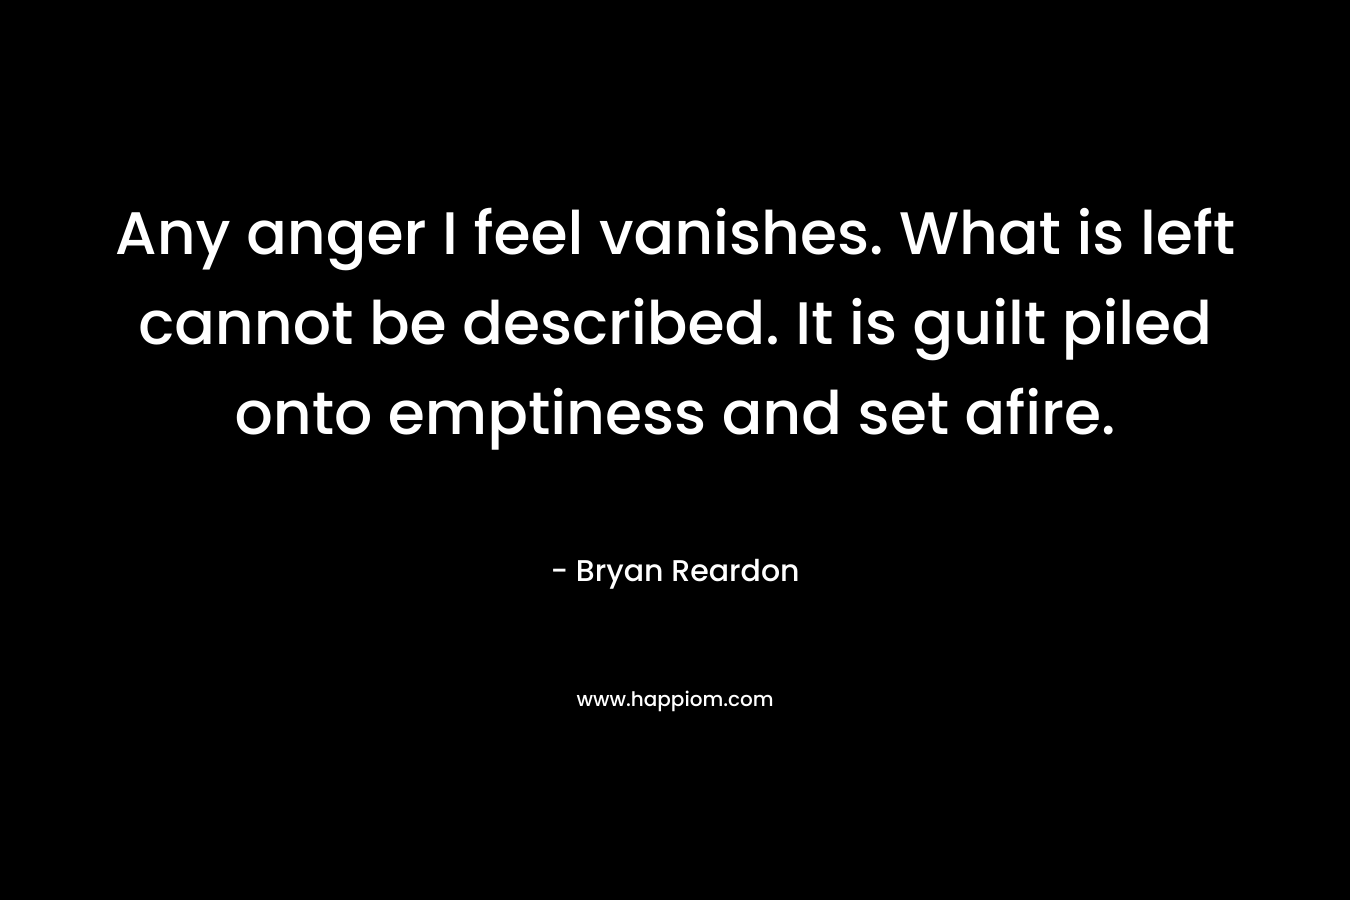 Any anger I feel vanishes. What is left cannot be described. It is guilt piled onto emptiness and set afire.